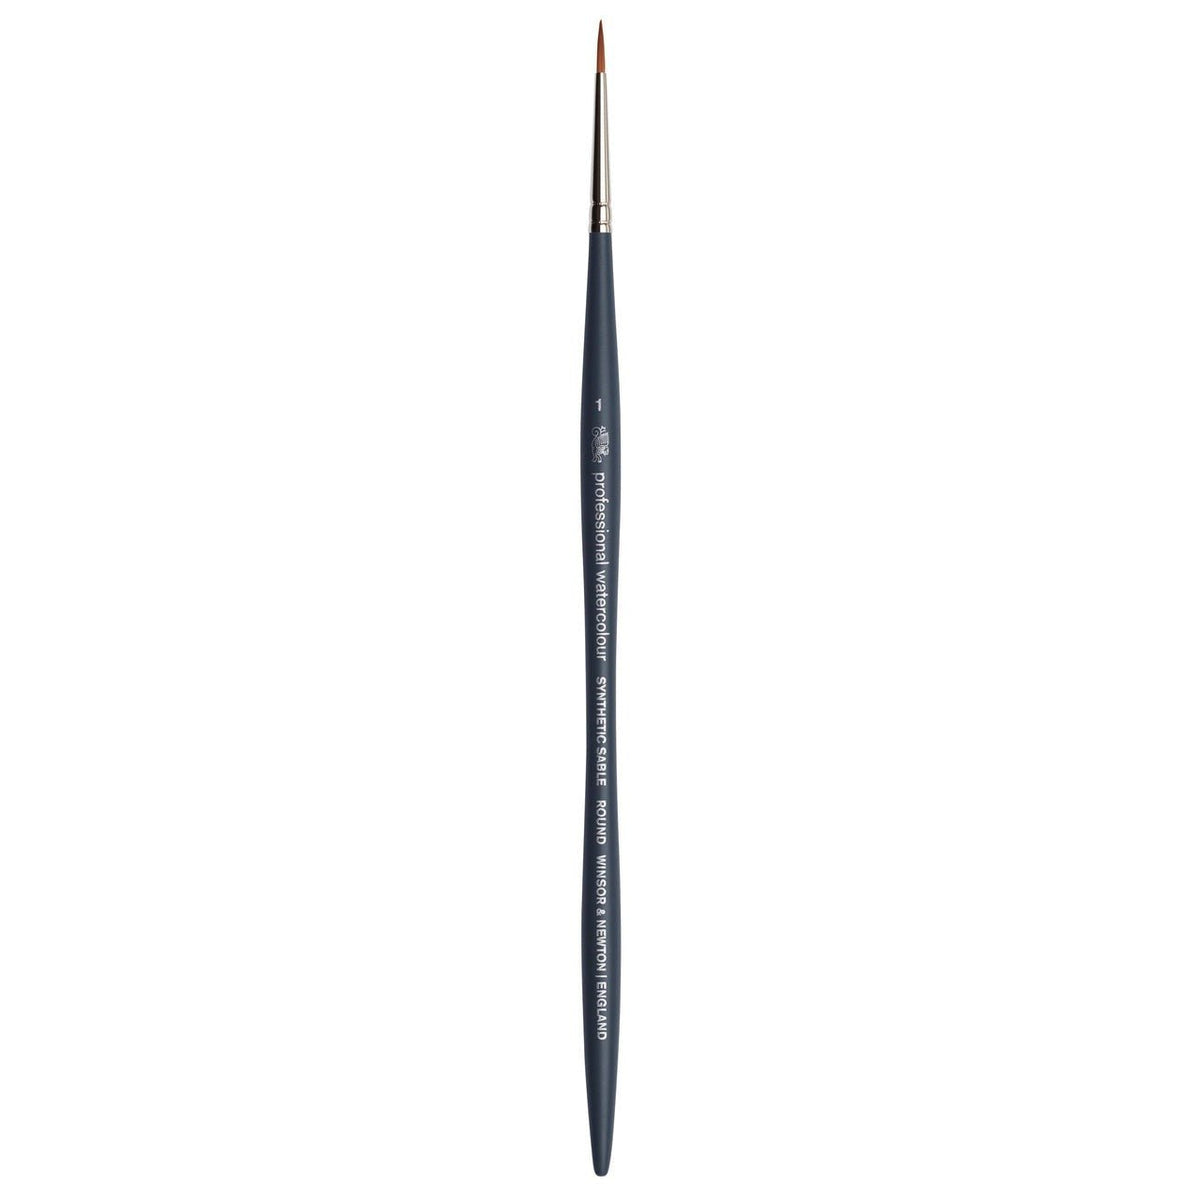 Winsor & Newton Professional Watercolor Synthetic Sable Brush - Round 1 - merriartist.com